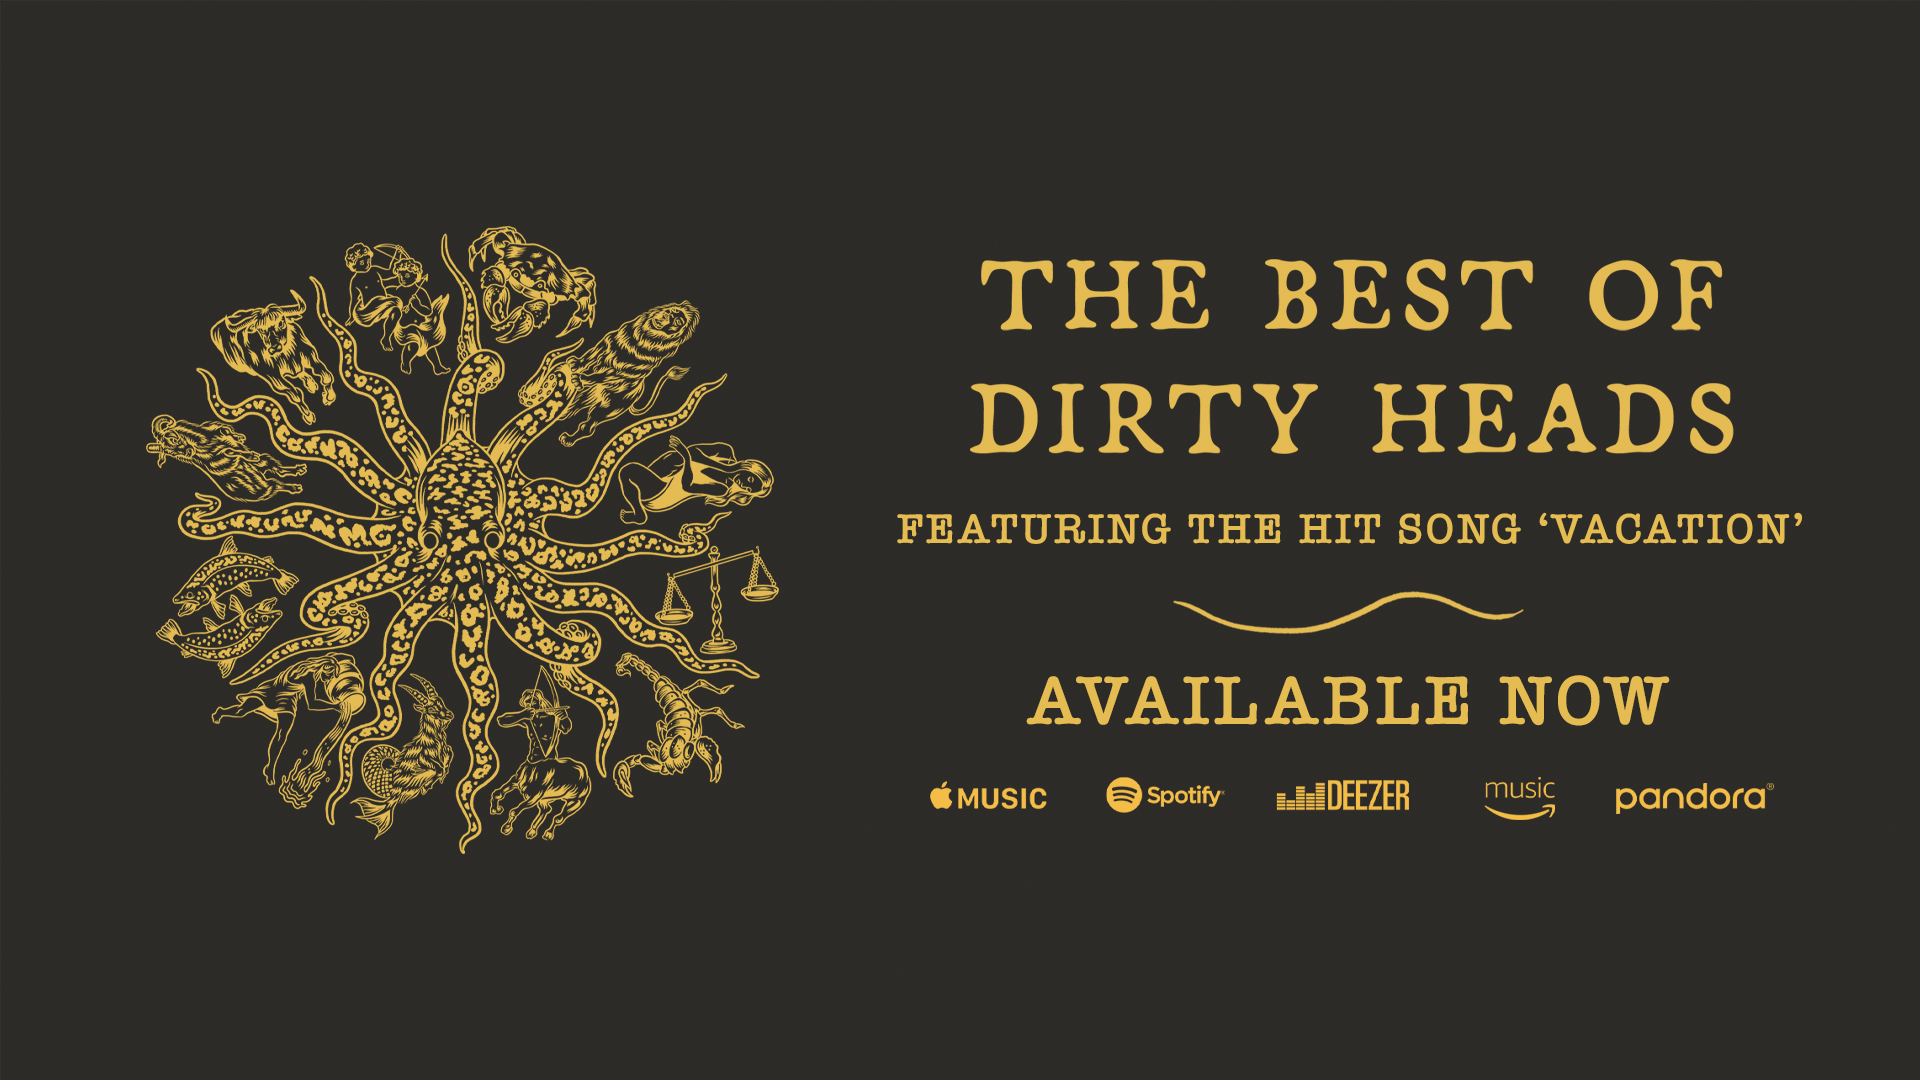 dirty heads, dirty heads sublime with rome, dirty heads salt lake city, dirty heads album, best of dirty heads album, best of dirty heads